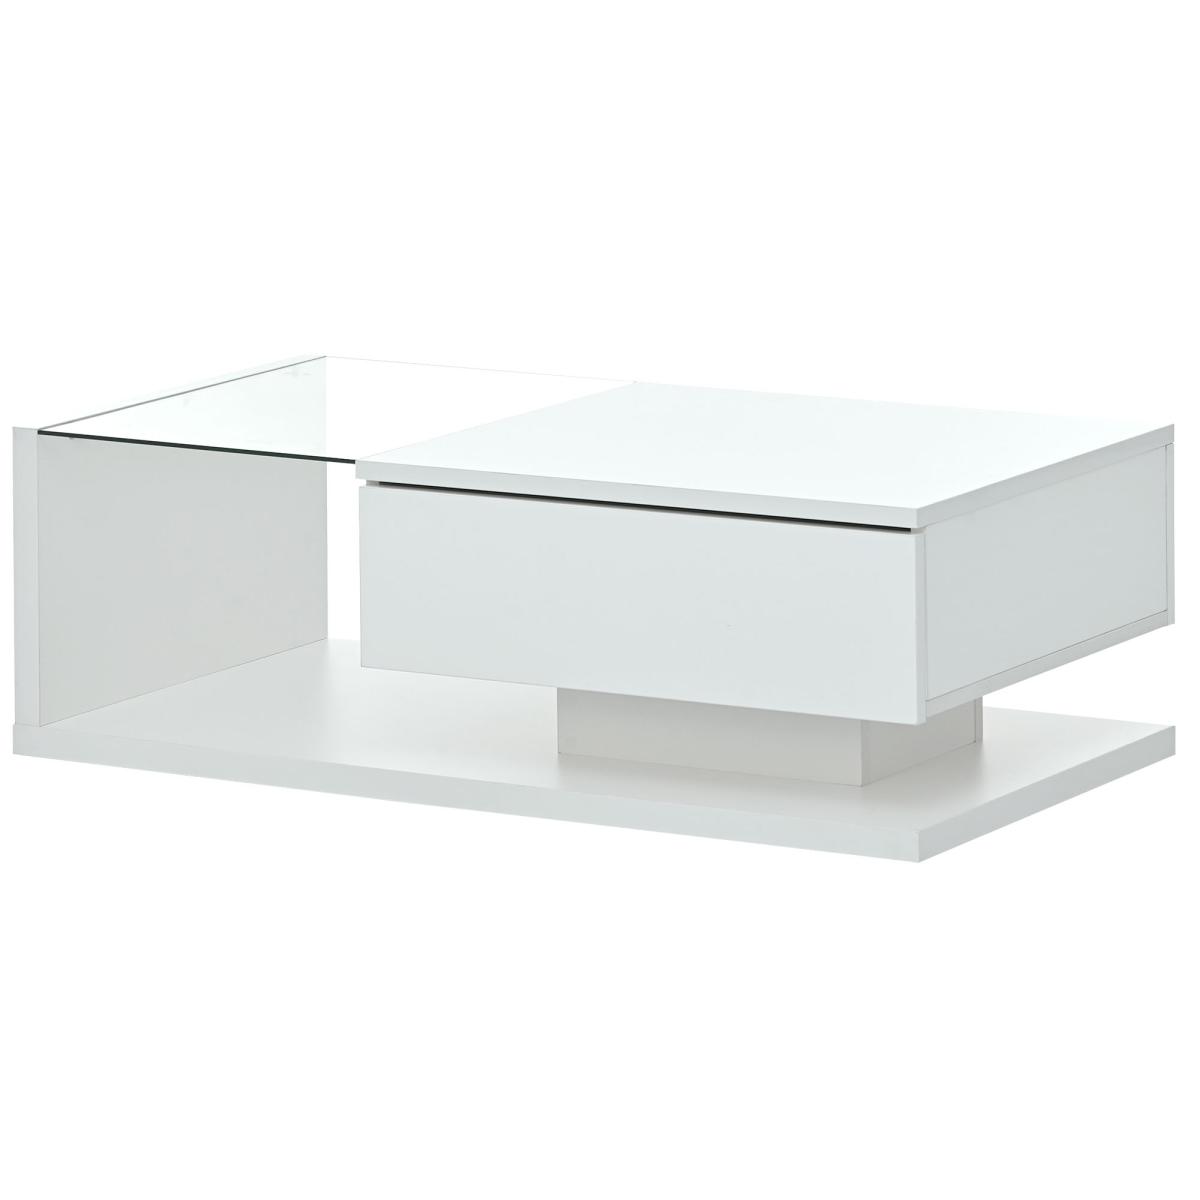 ON-TREND Modern Coffee Table with Tempered Glass, Wooden Cocktail Table with High-gloss Uv Surface, Modernist 2-Tier Rectangle Center Table for Living Room, White